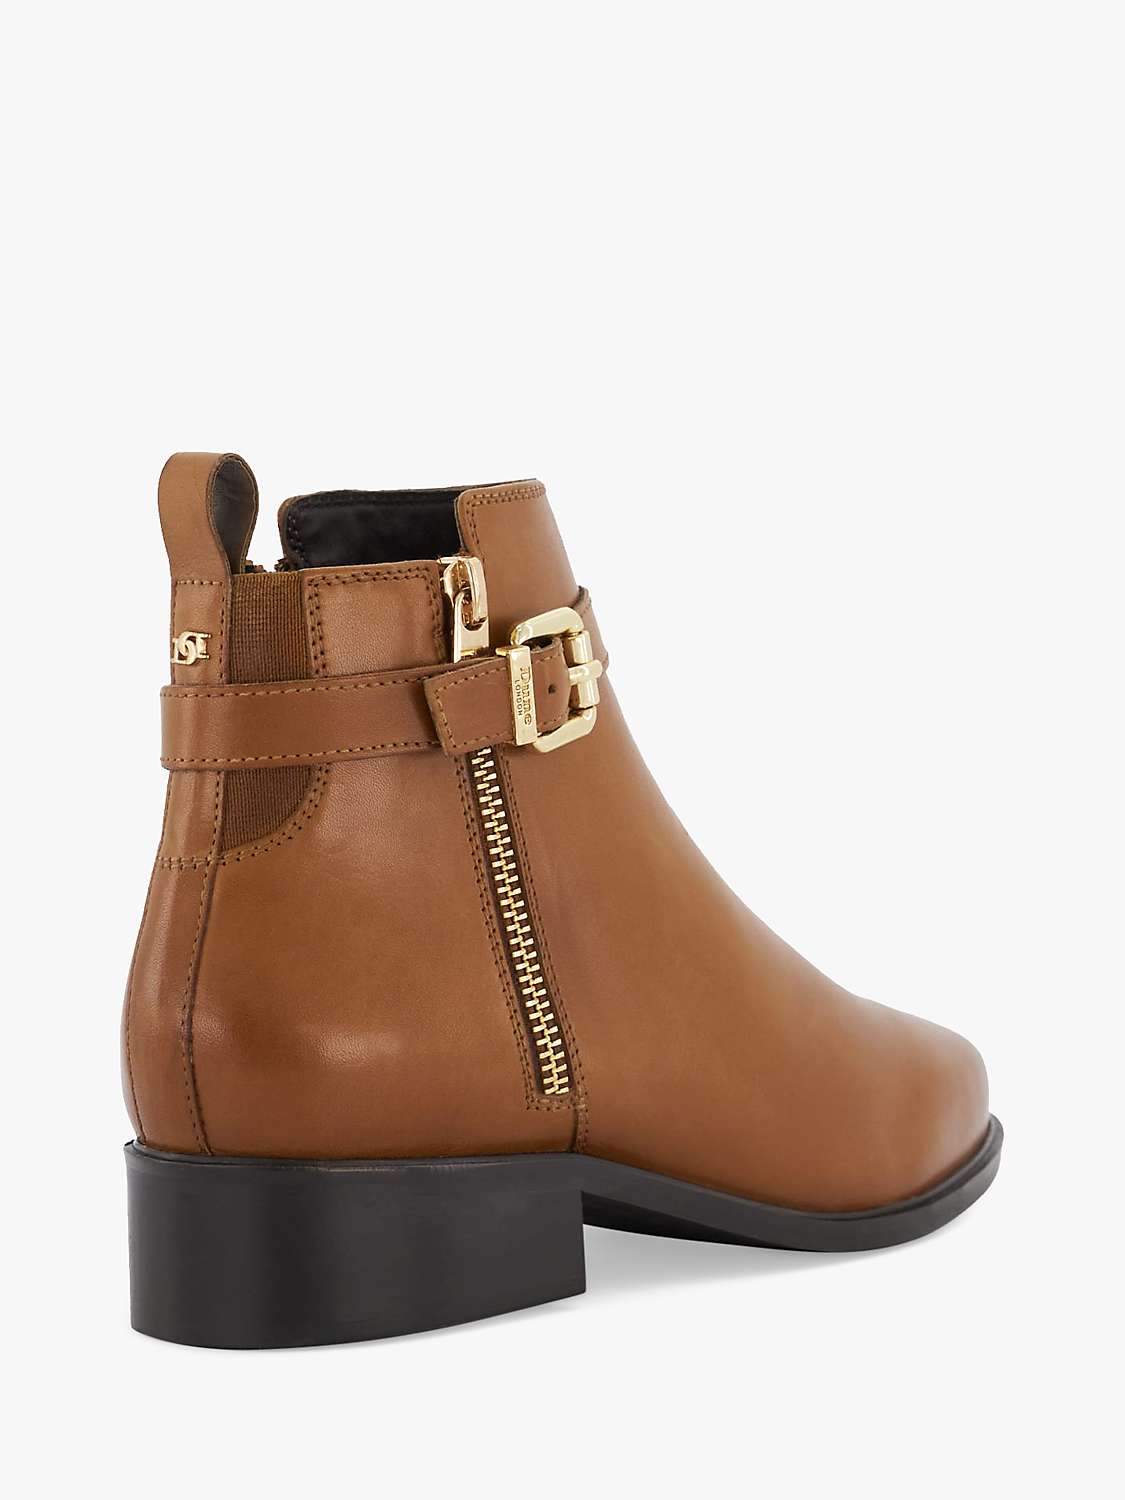 Buy Dune Pepi Leather Ankle Boots Online at johnlewis.com